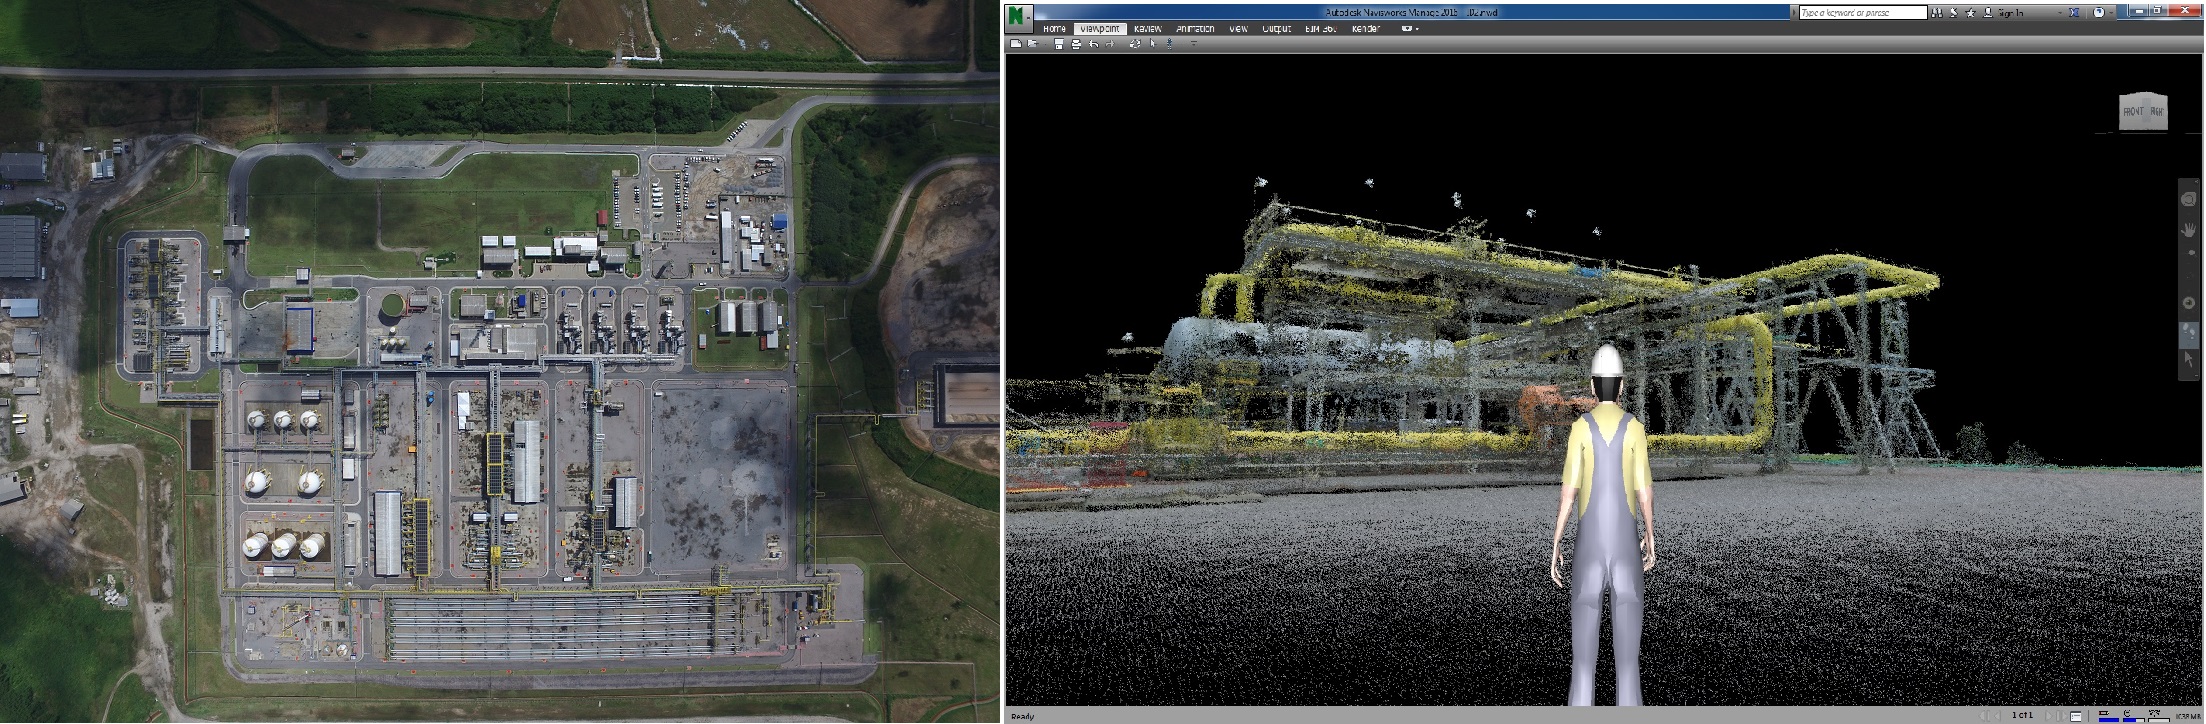 Industrial inspection results of the oil plant mapping project in Pix4Dmapper